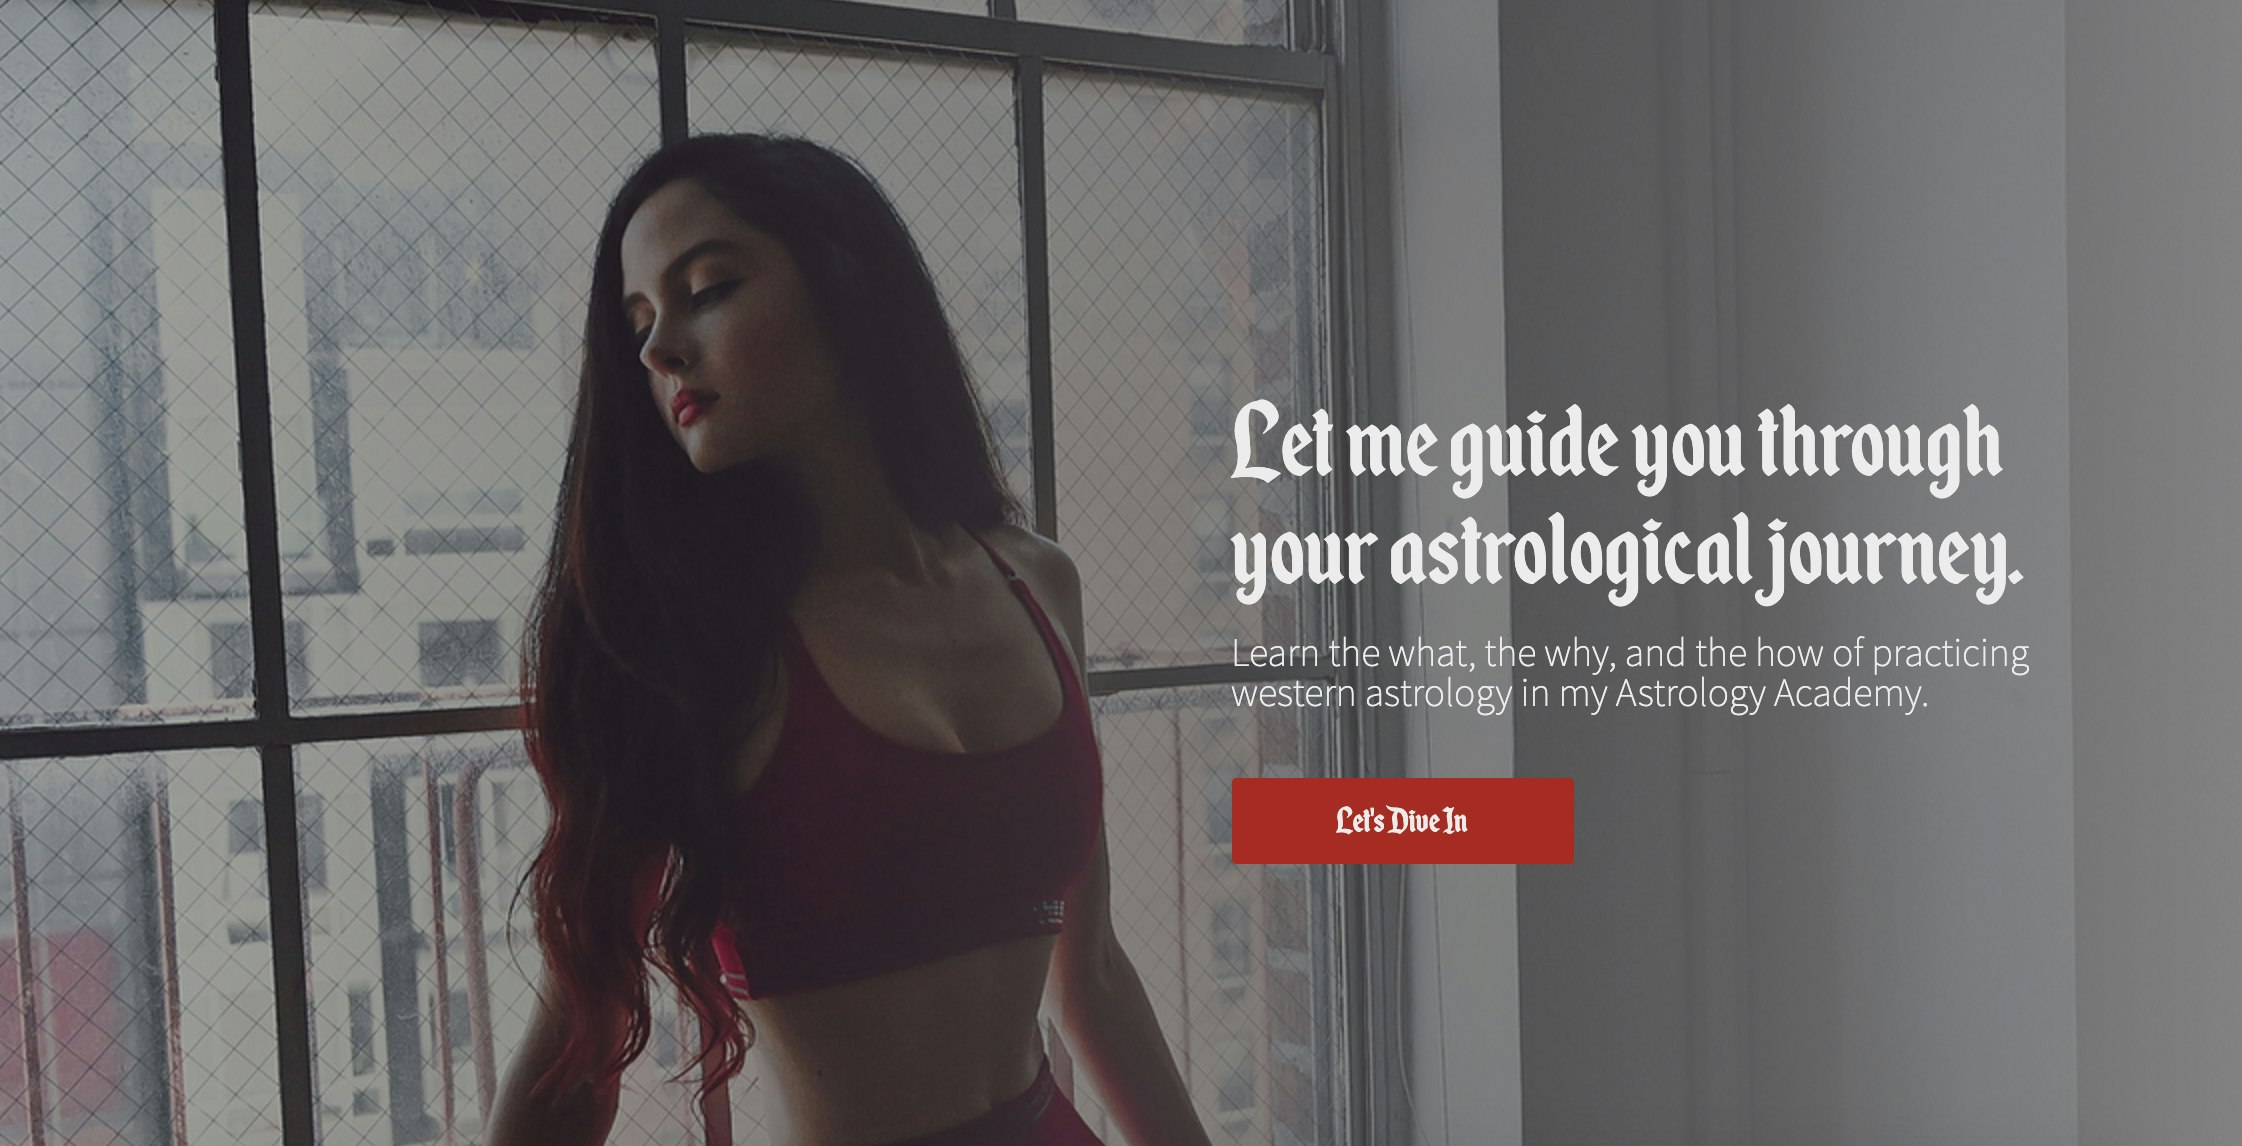 Screenshot of Maren Altman's homepage. Features a silhouette of Maren leaning against a window with overlay text that reads "Let me guide you through your astrological journey. Learn the what, the why, and the how of practicing western astrology in my Astrology Academy."